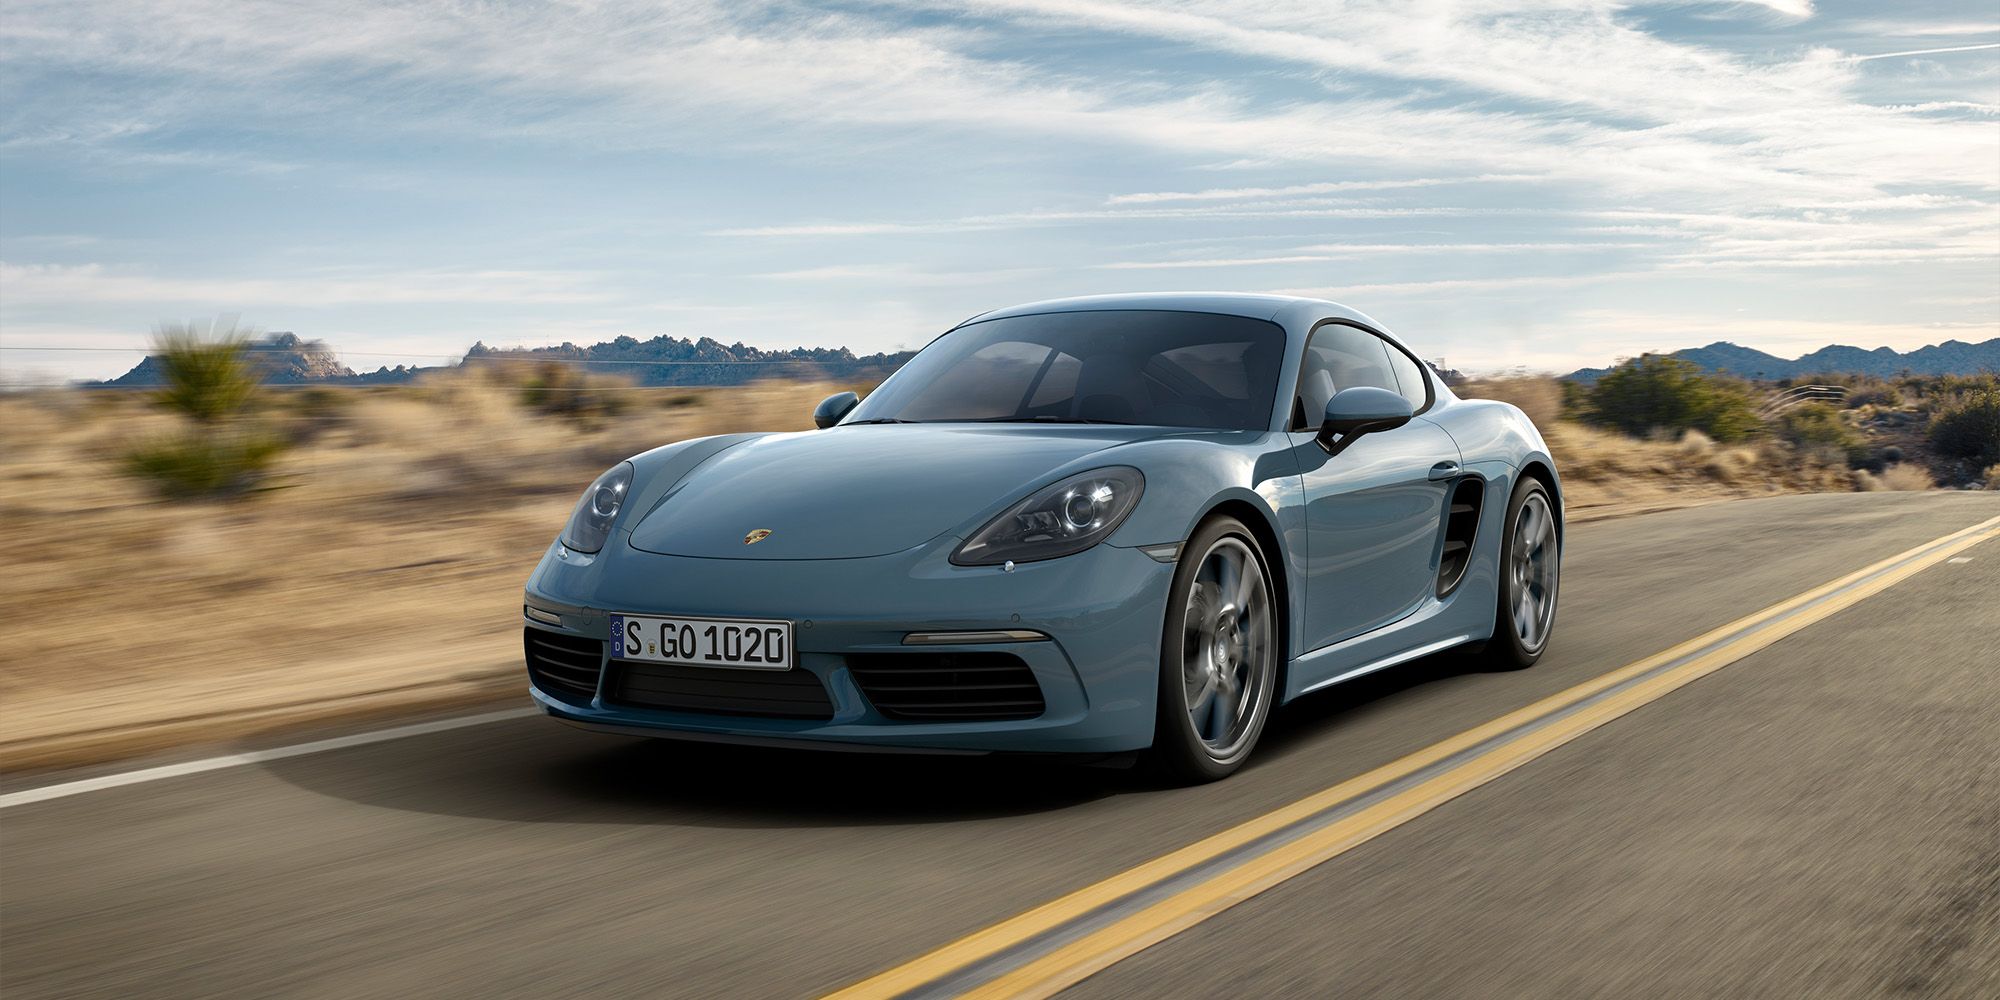 The front of the 718 Cayman on the move